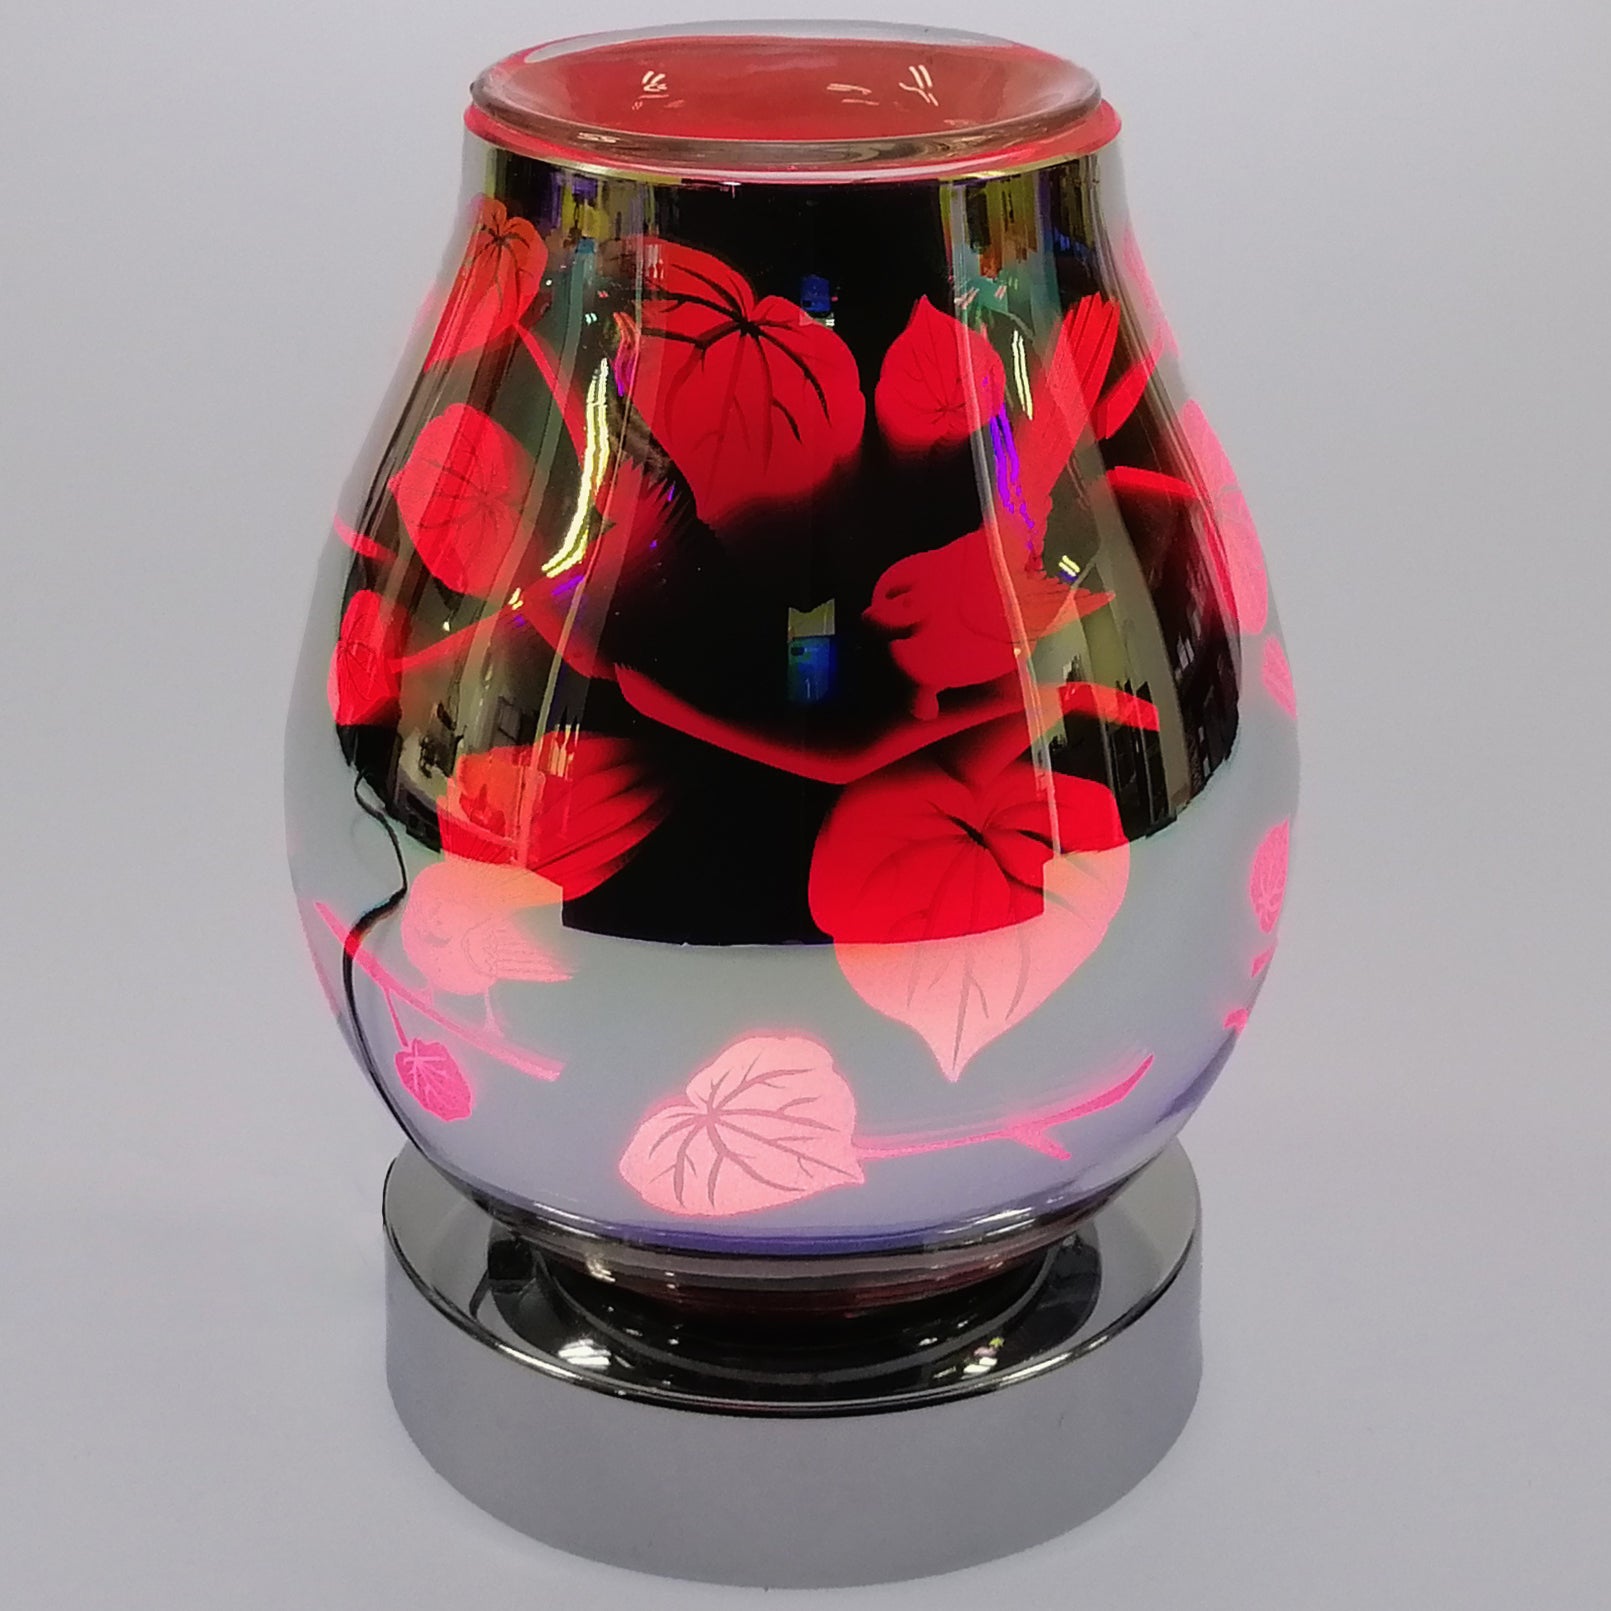 Scentchips Warmer with LED 'Fantail' Colour Changing Display